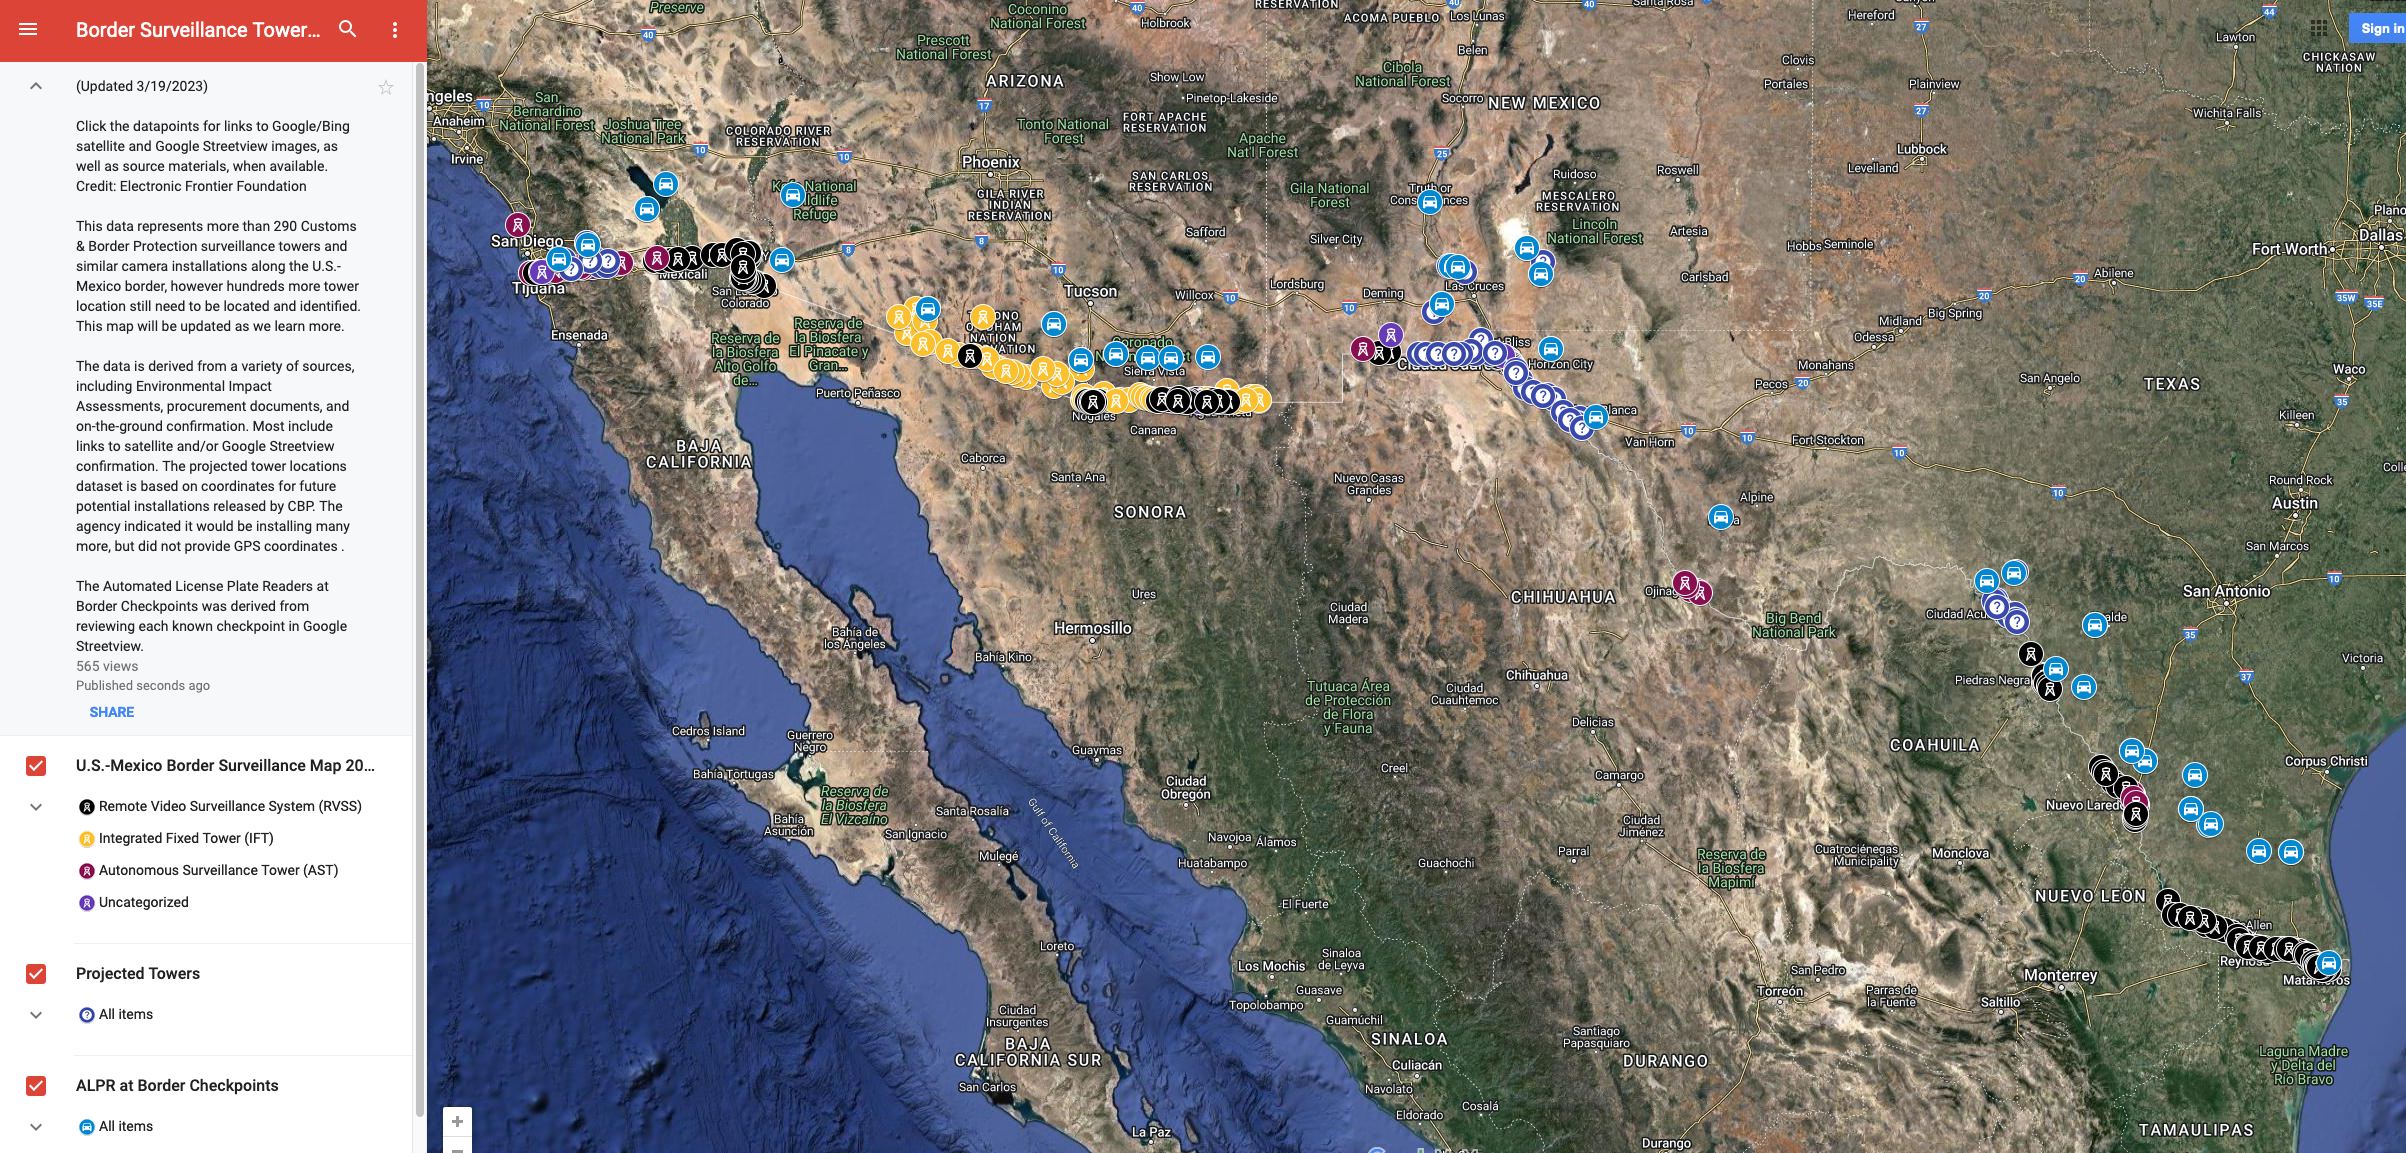 A map of the Southwestern United States, with various icons representing surveillance towers. 